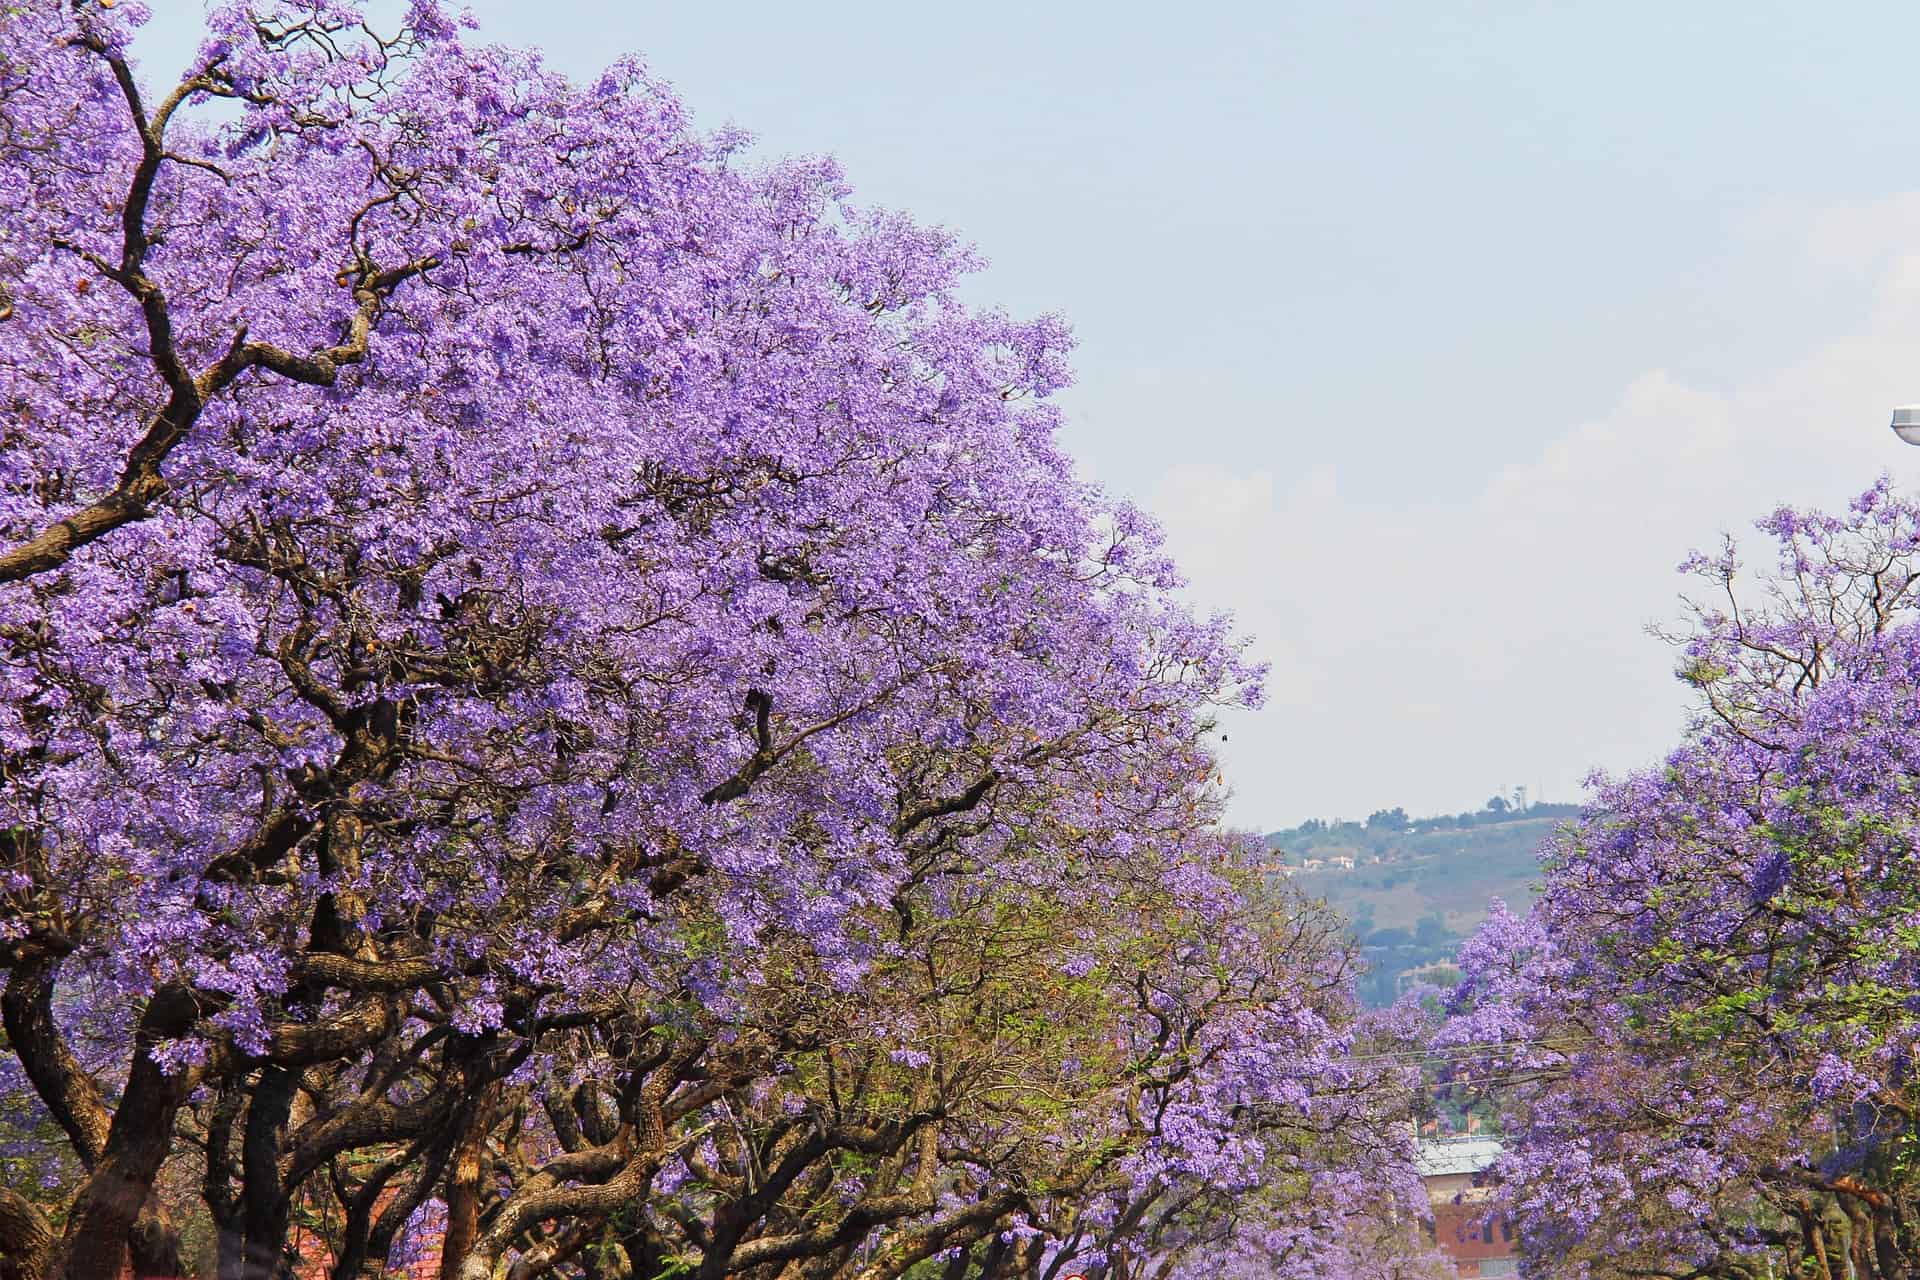 Best things to do in Johannesburg South Africa - Kenzeo Mpoyi - Jacaranda trees by Sharon Ang on Pixabay